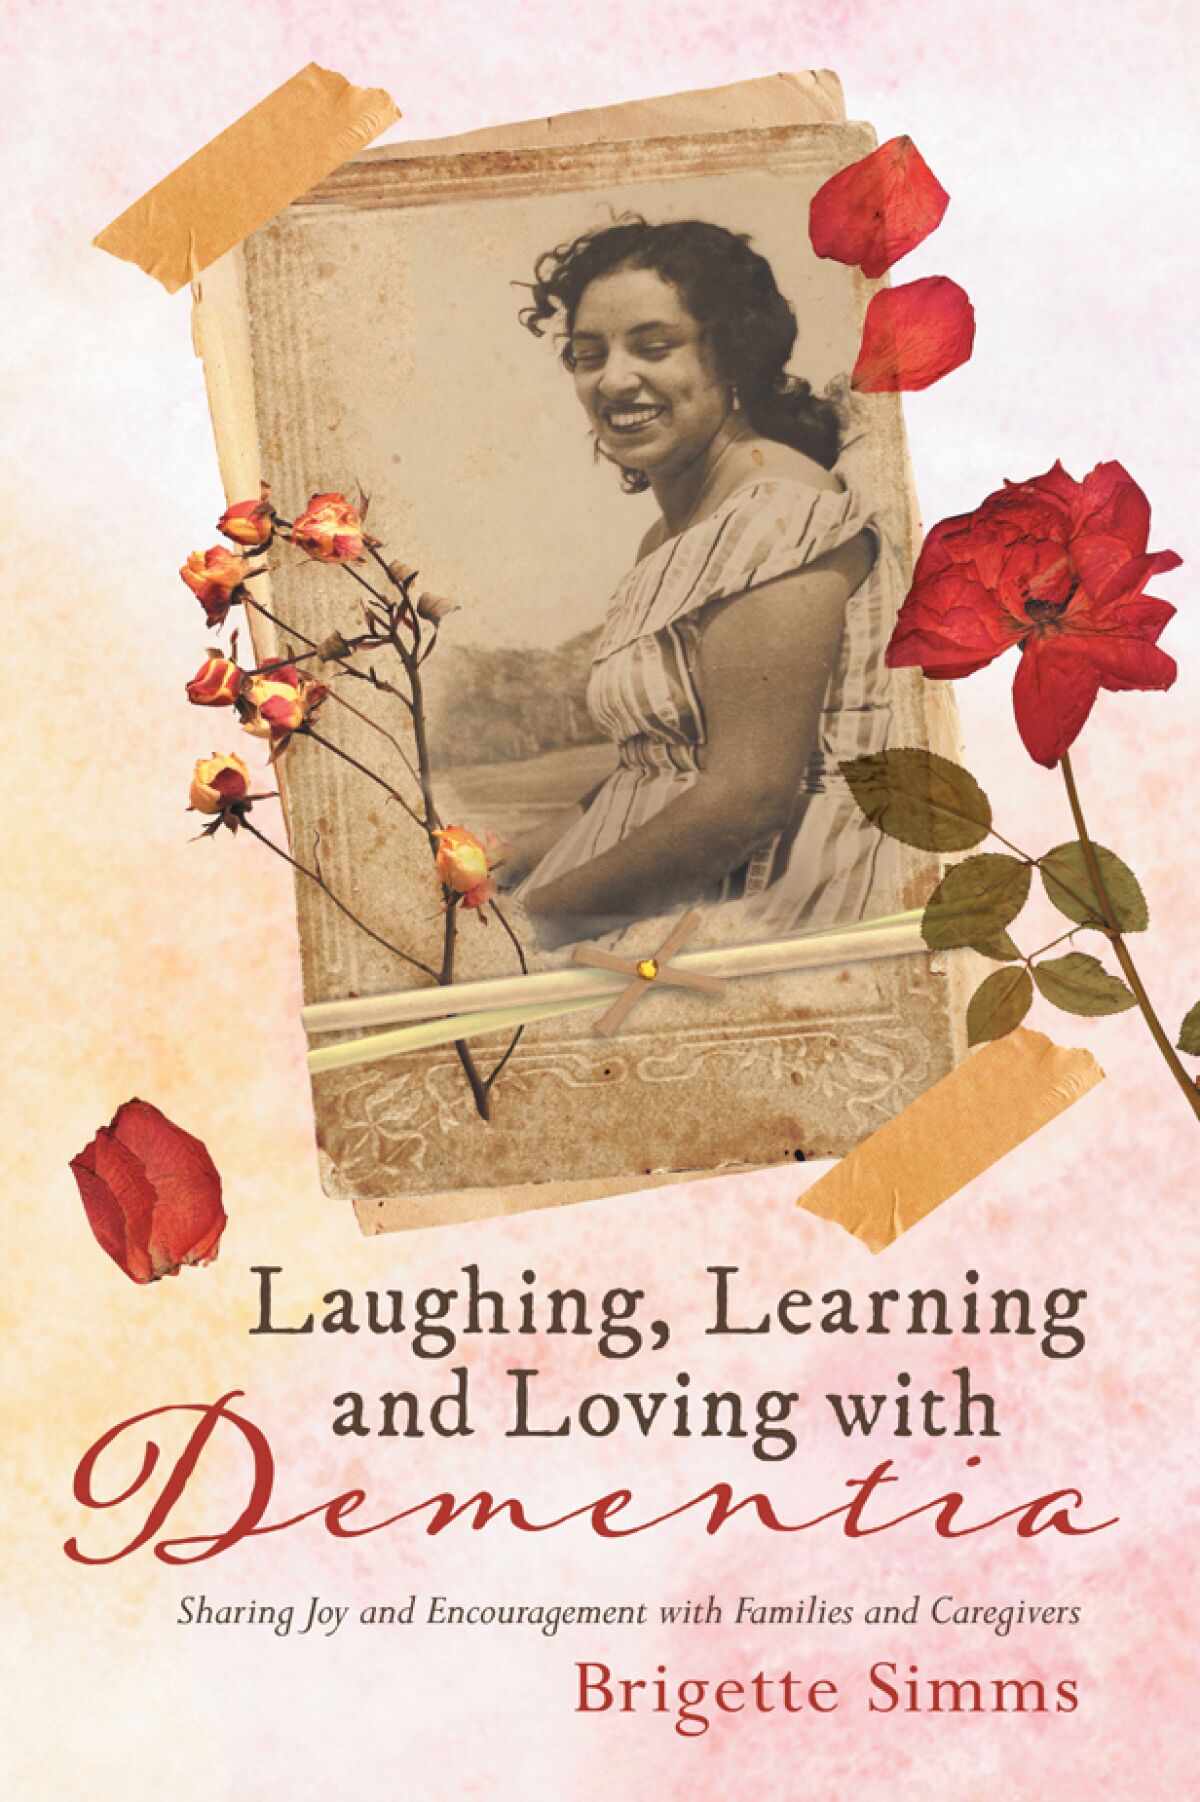 The cover of “Laughing, Learning and Loving with Dementia”